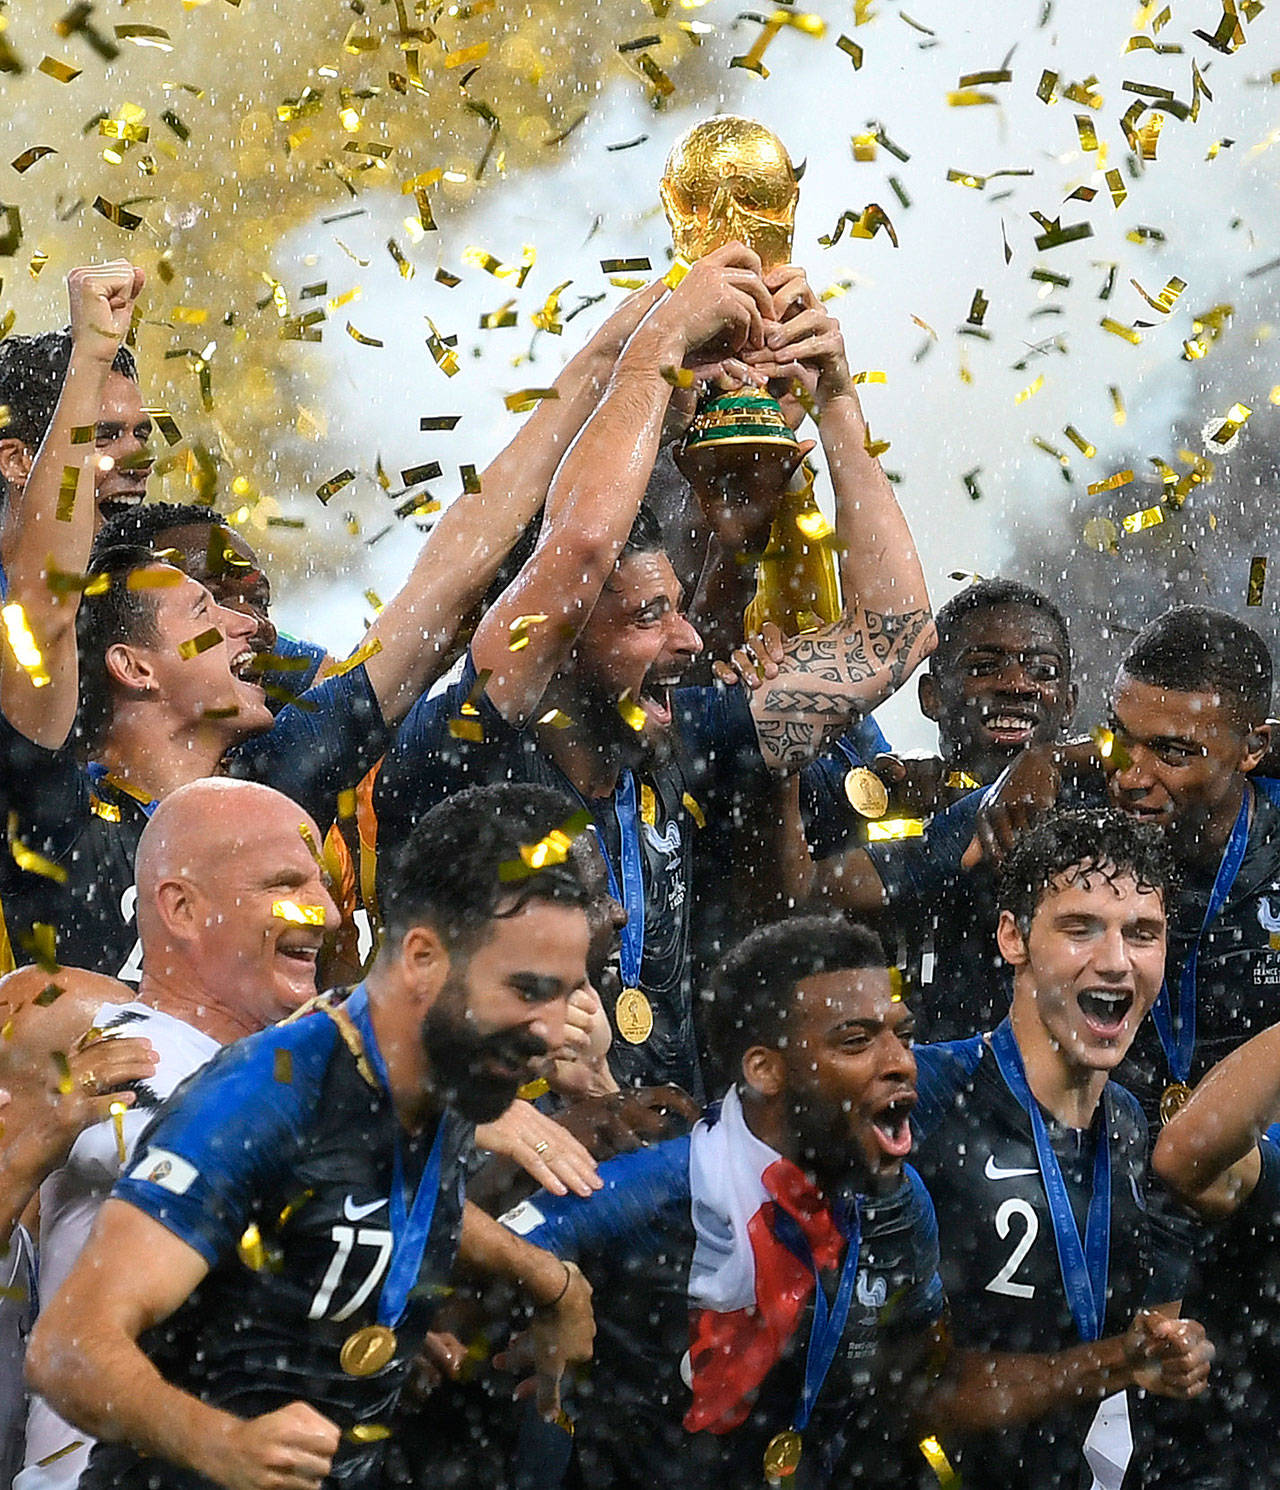 Players of France celebrate at the awarding ceremony after the 2018 FIFA World Cup final match between France and Croatia in Moscow, Russia, on Sunday. France defeated Croatia 4-2 and claimed the title. (Li Ga | Xinhua via ZUMA wire)